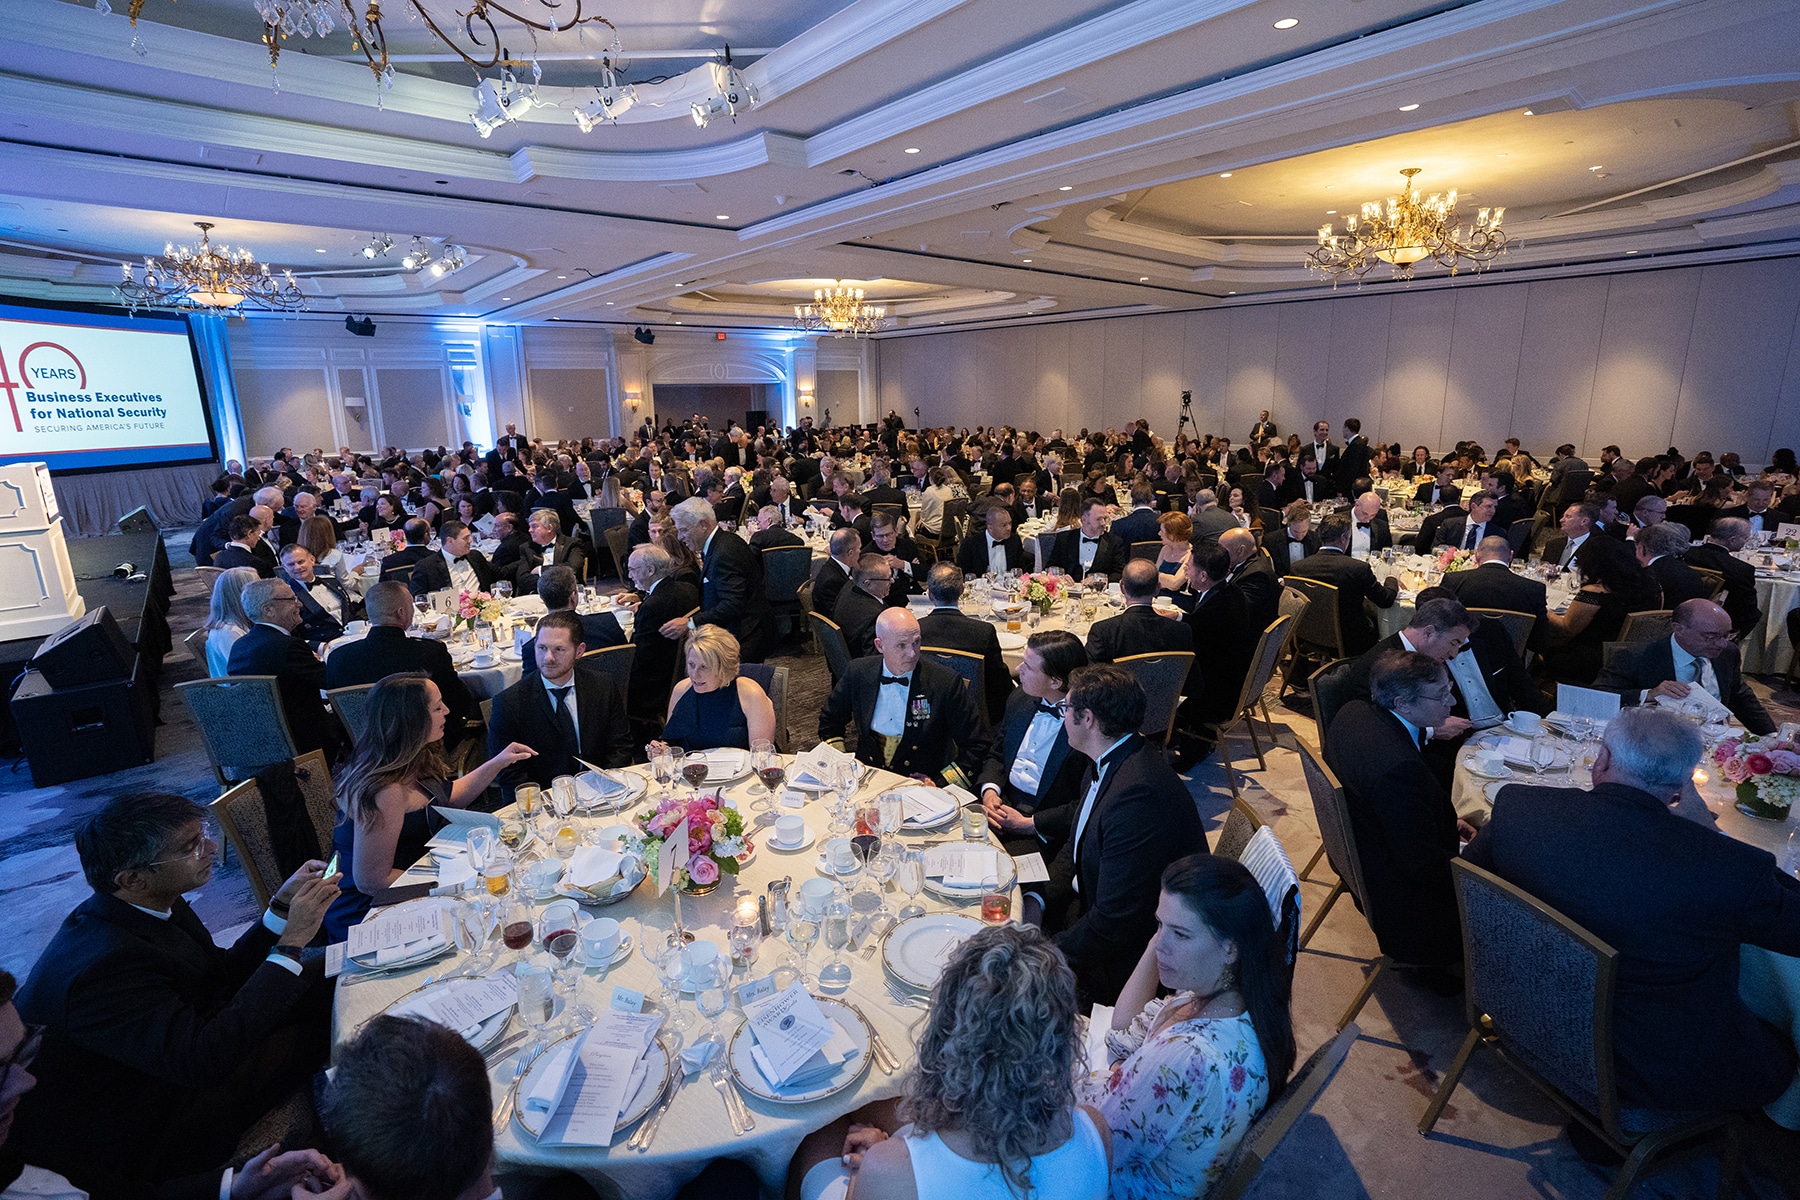 attendees at the ballroom of the 2022 Eisenhower Awards gala